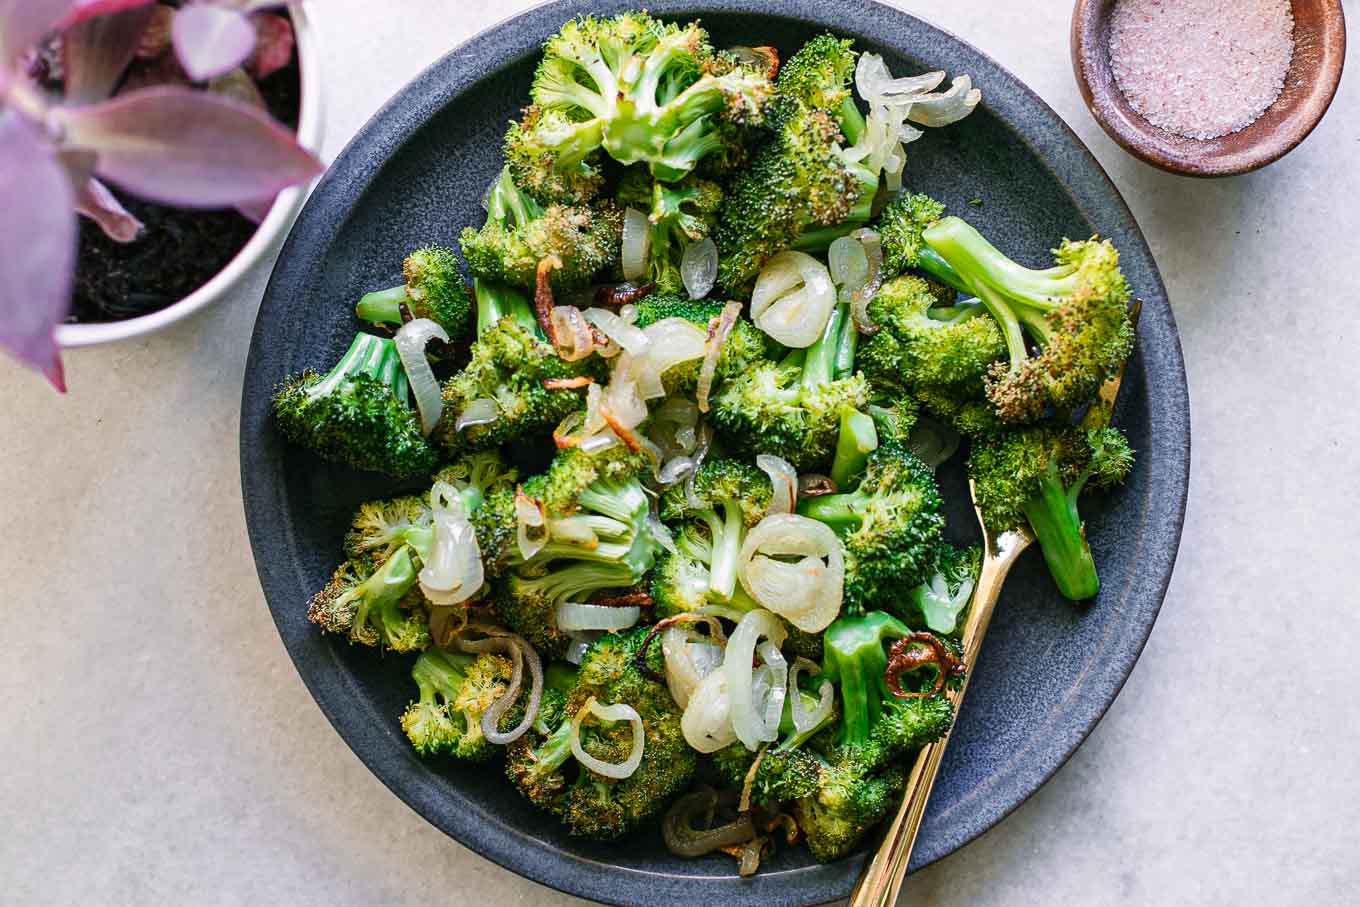 baked broccoli and shallots on a blue plate with a gold fork